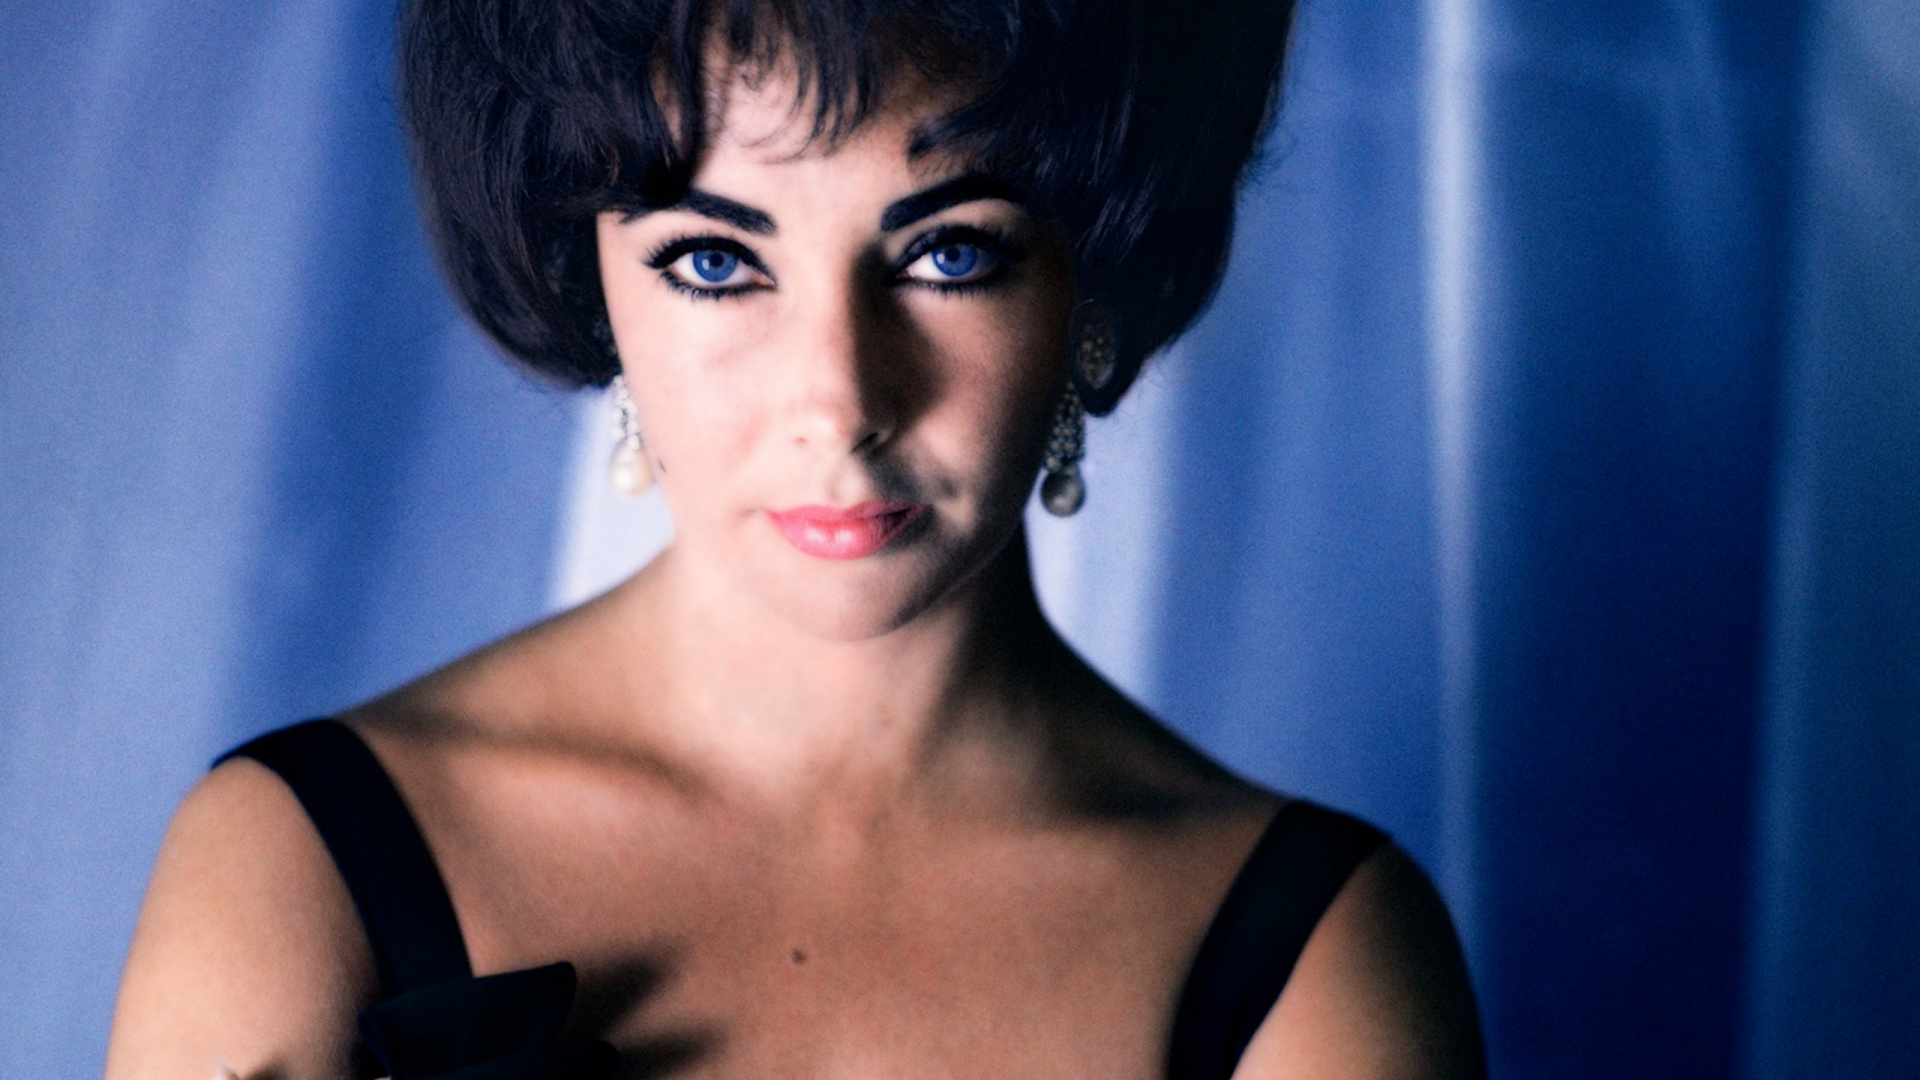 Elizabeth Taylor, HD wallpapers, High resolution, Quality pictures, 1920x1080 Full HD Desktop